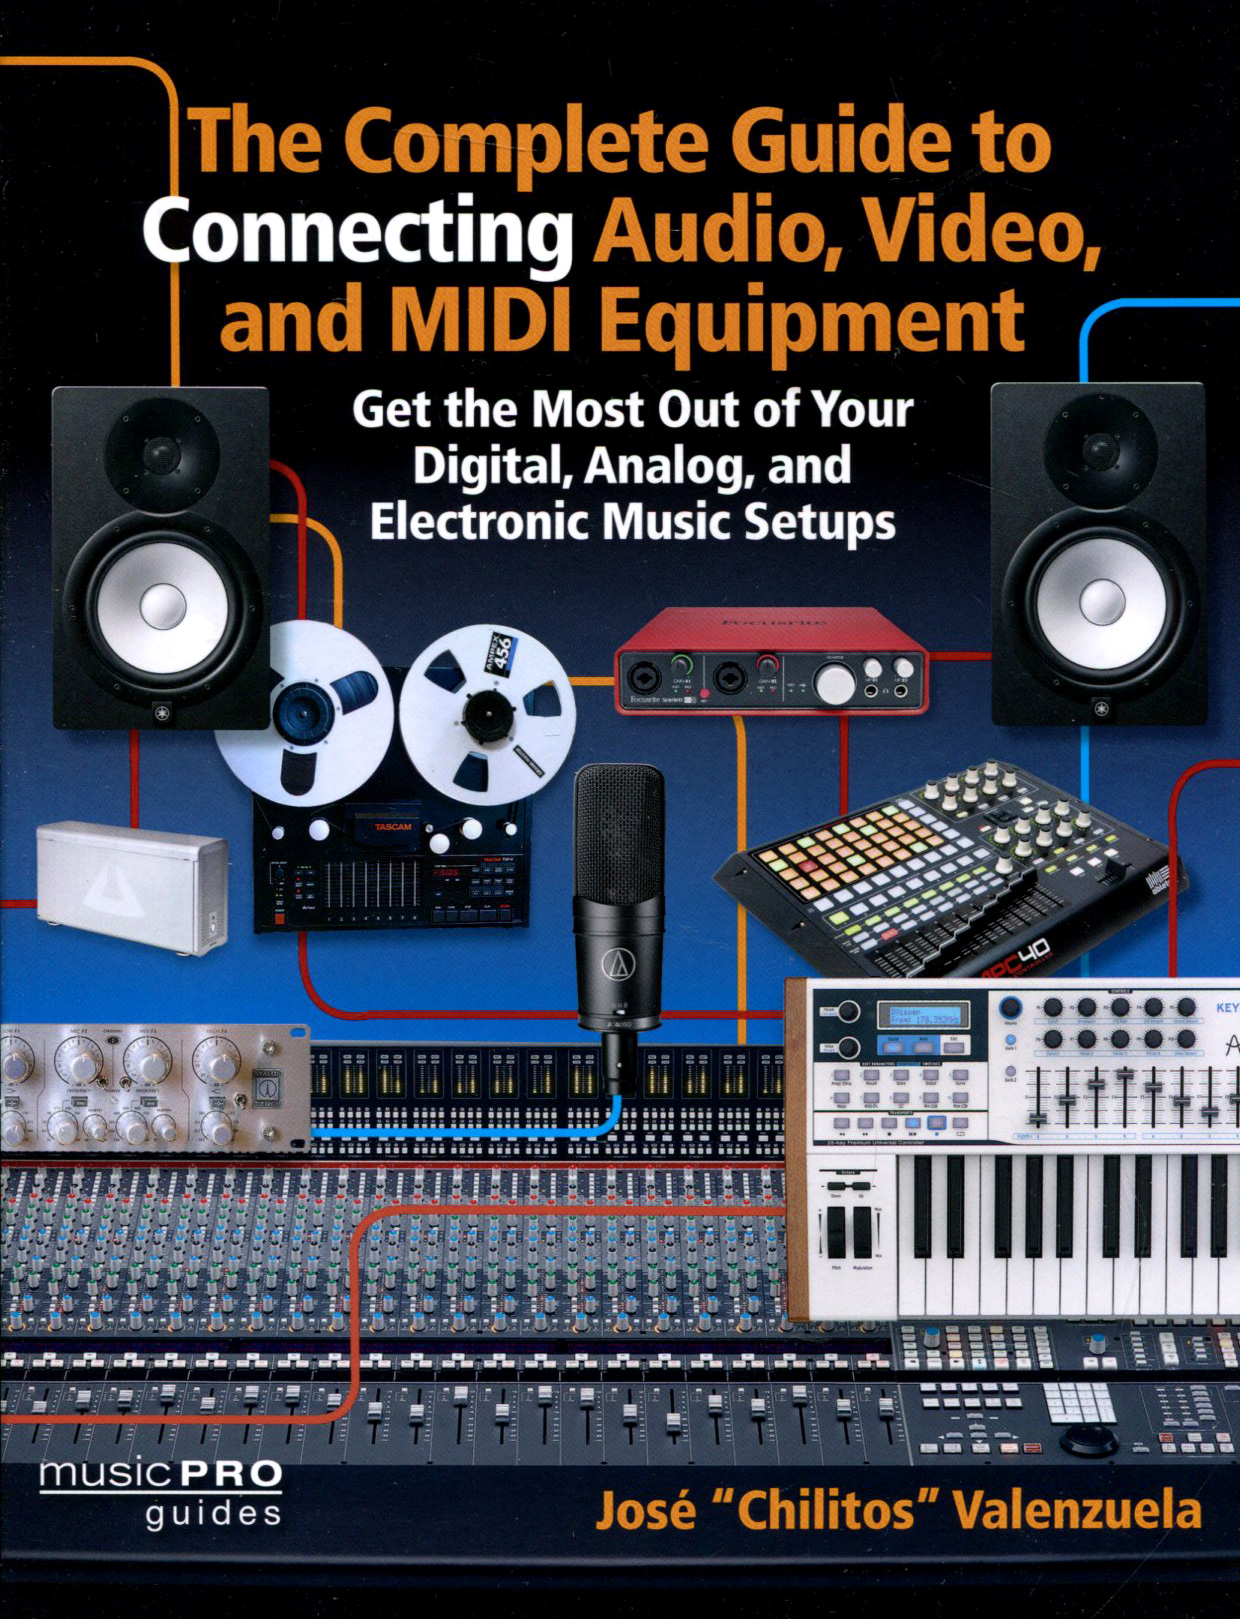 The Complete Guide to Connecting Audio, Video, and Midi Equipment: Get the Most Out of Your Digital, Analog, and Electronic Music Setups